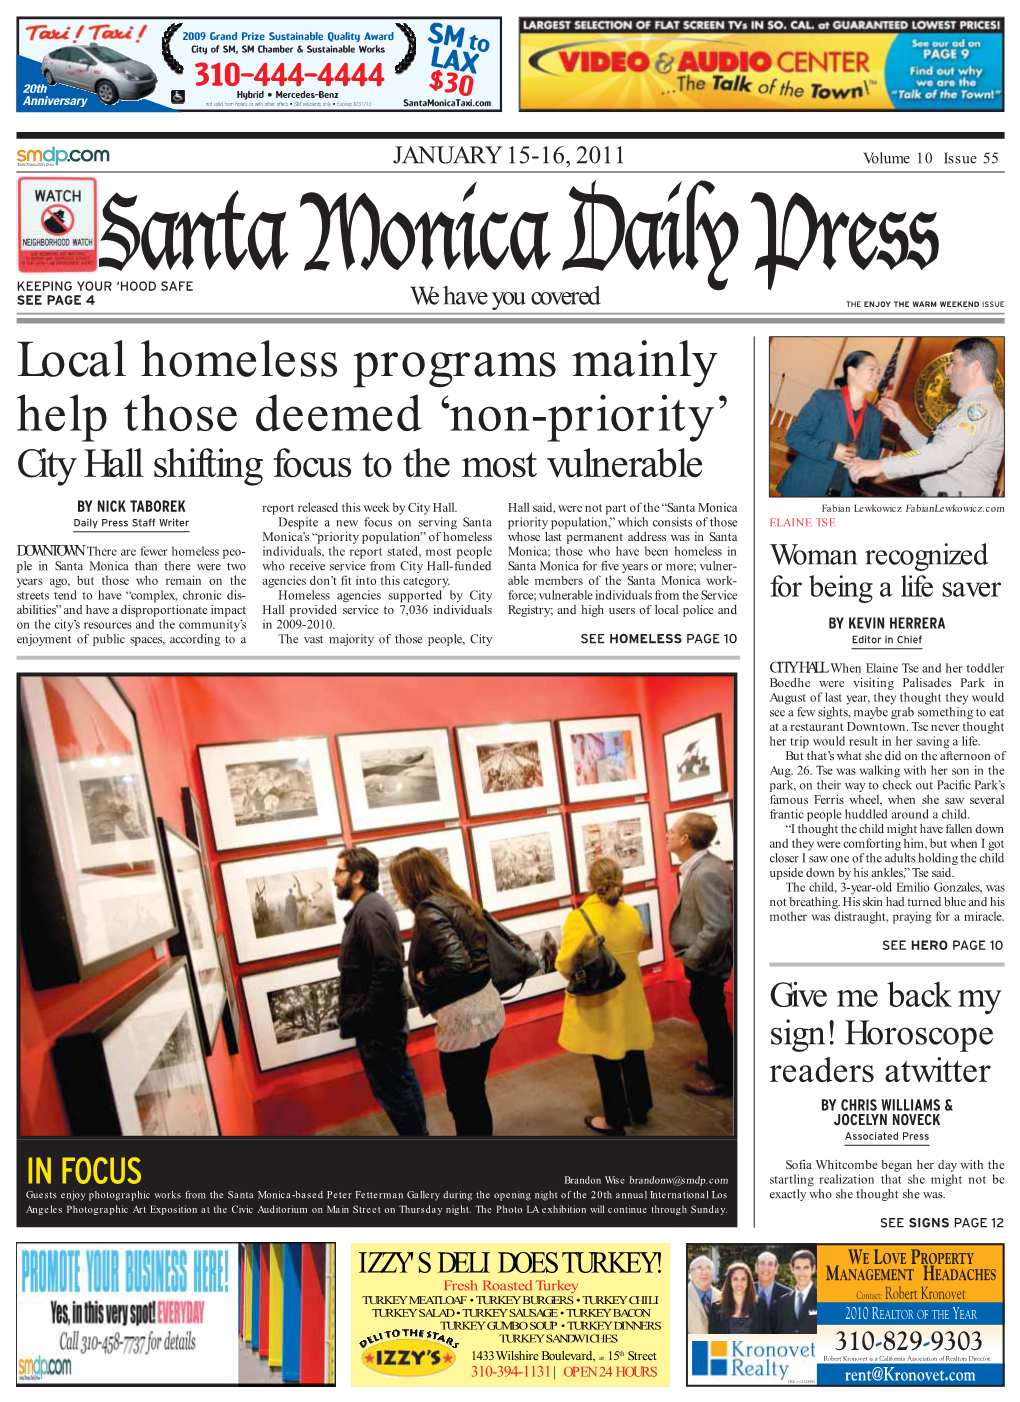 Local Homeless Programs Mainly Help Those Deemed 'Non-Priority'